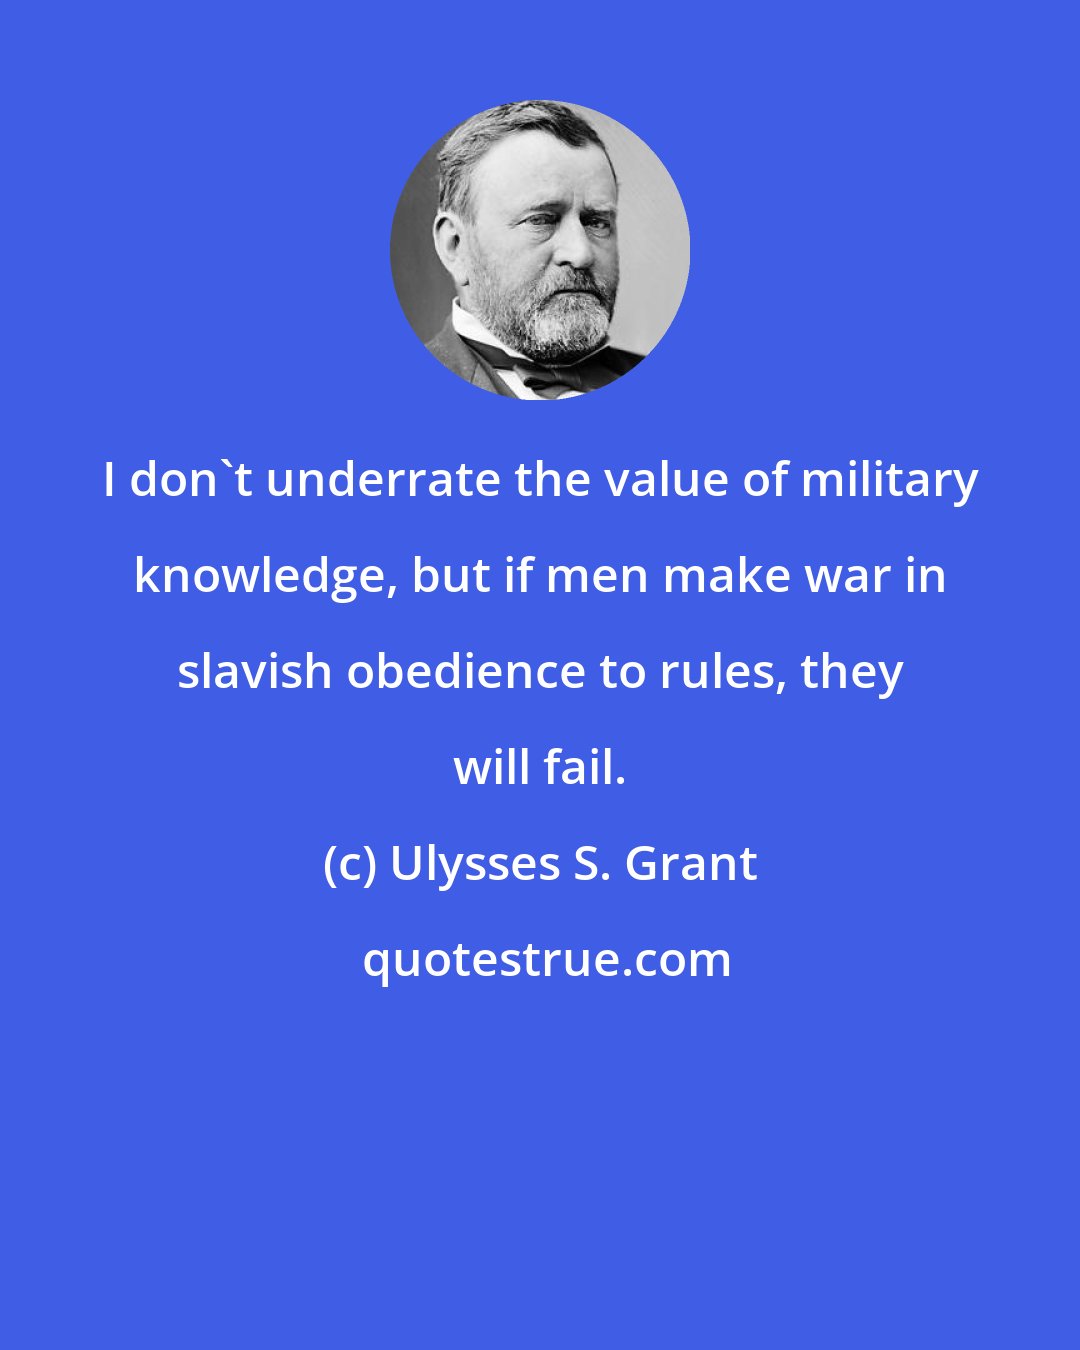 Ulysses S. Grant: I don't underrate the value of military knowledge, but if men make war in slavish obedience to rules, they will fail.